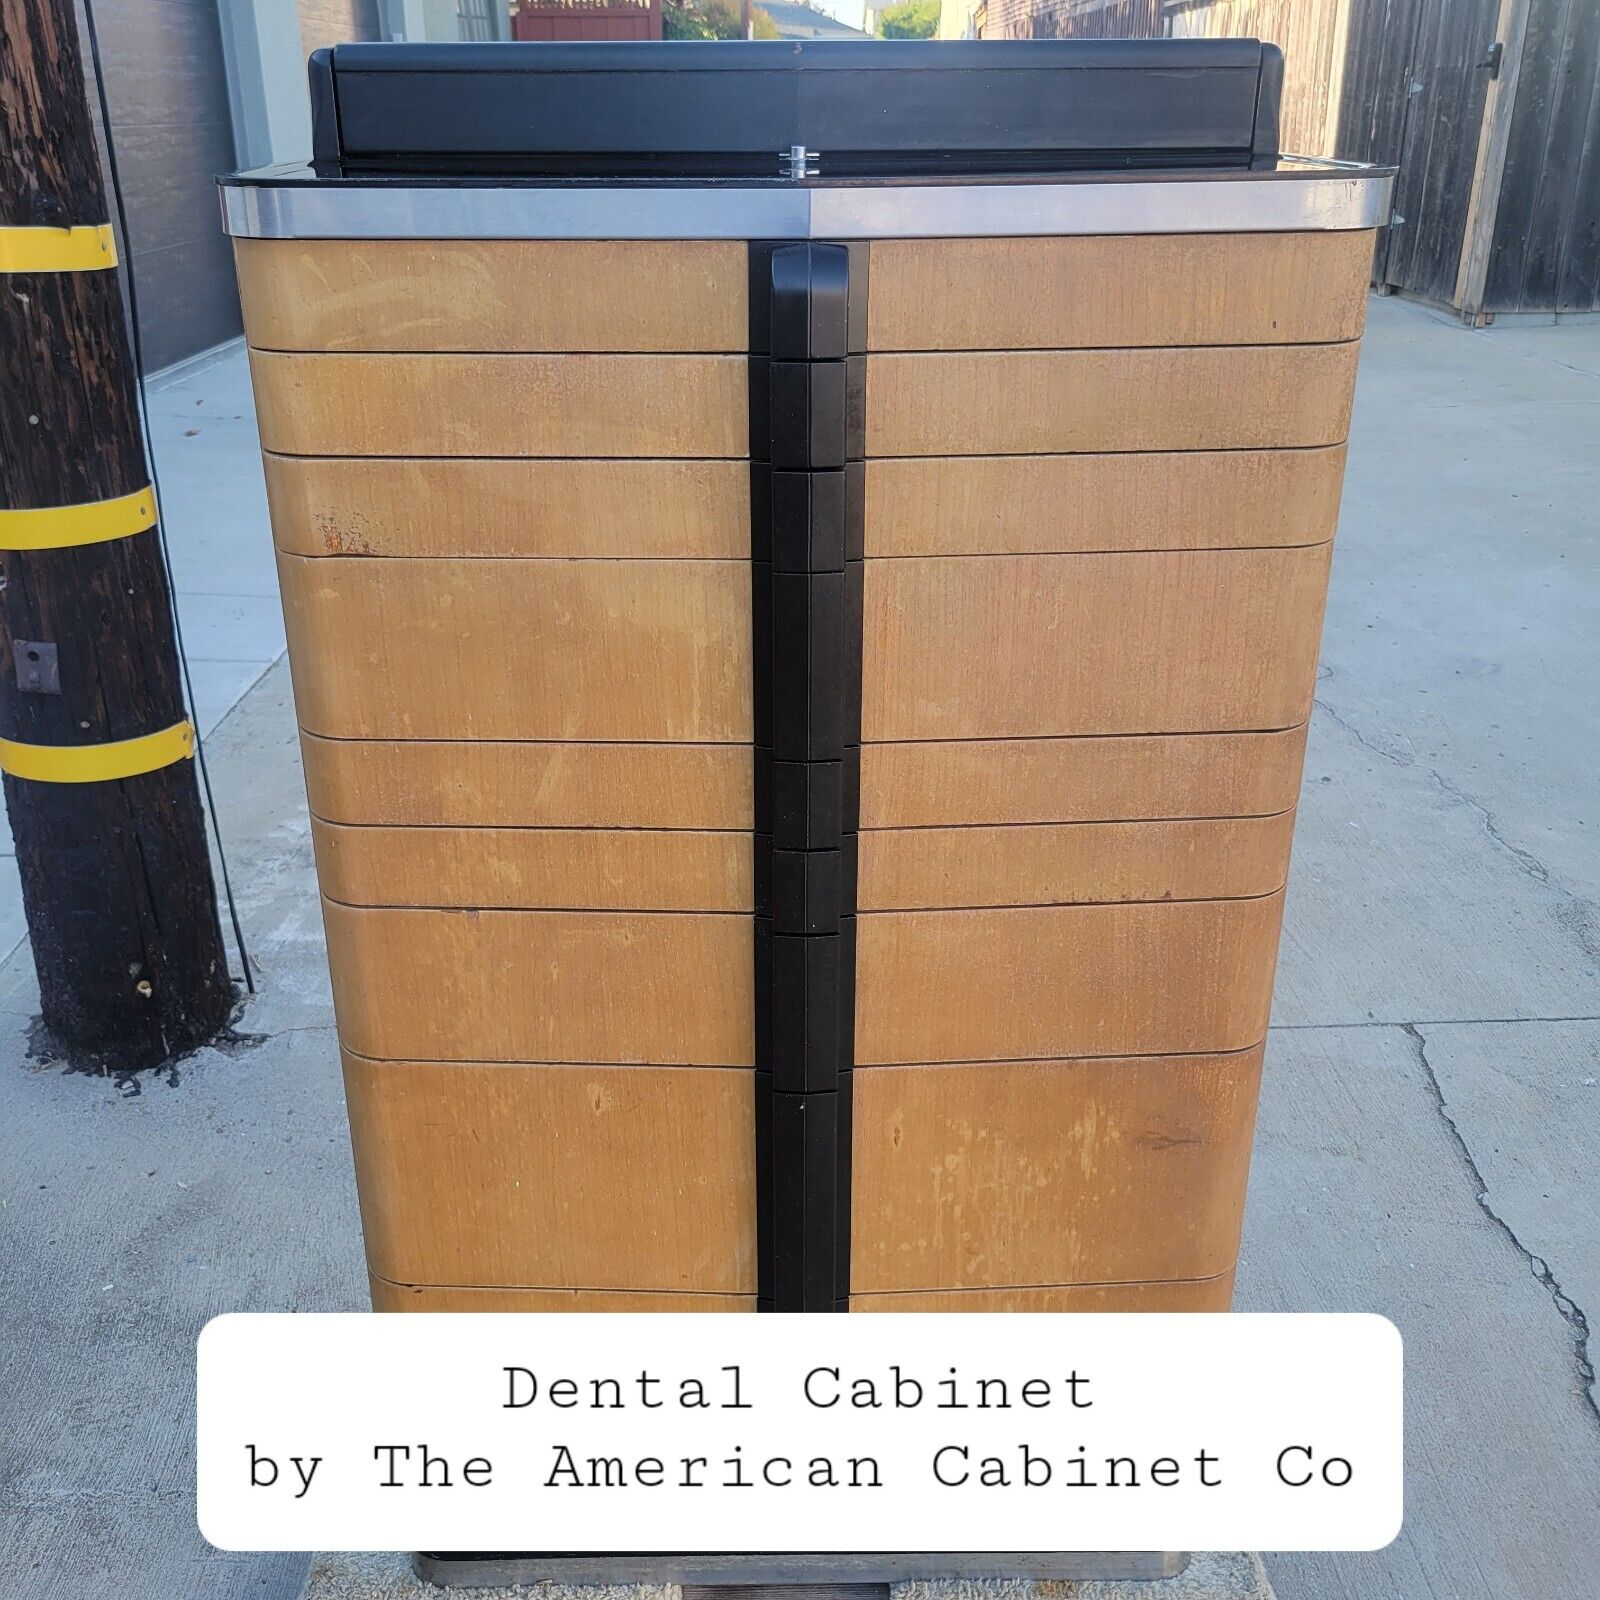 Vintage Dental Cabinet by The American Cabinet Co 1953